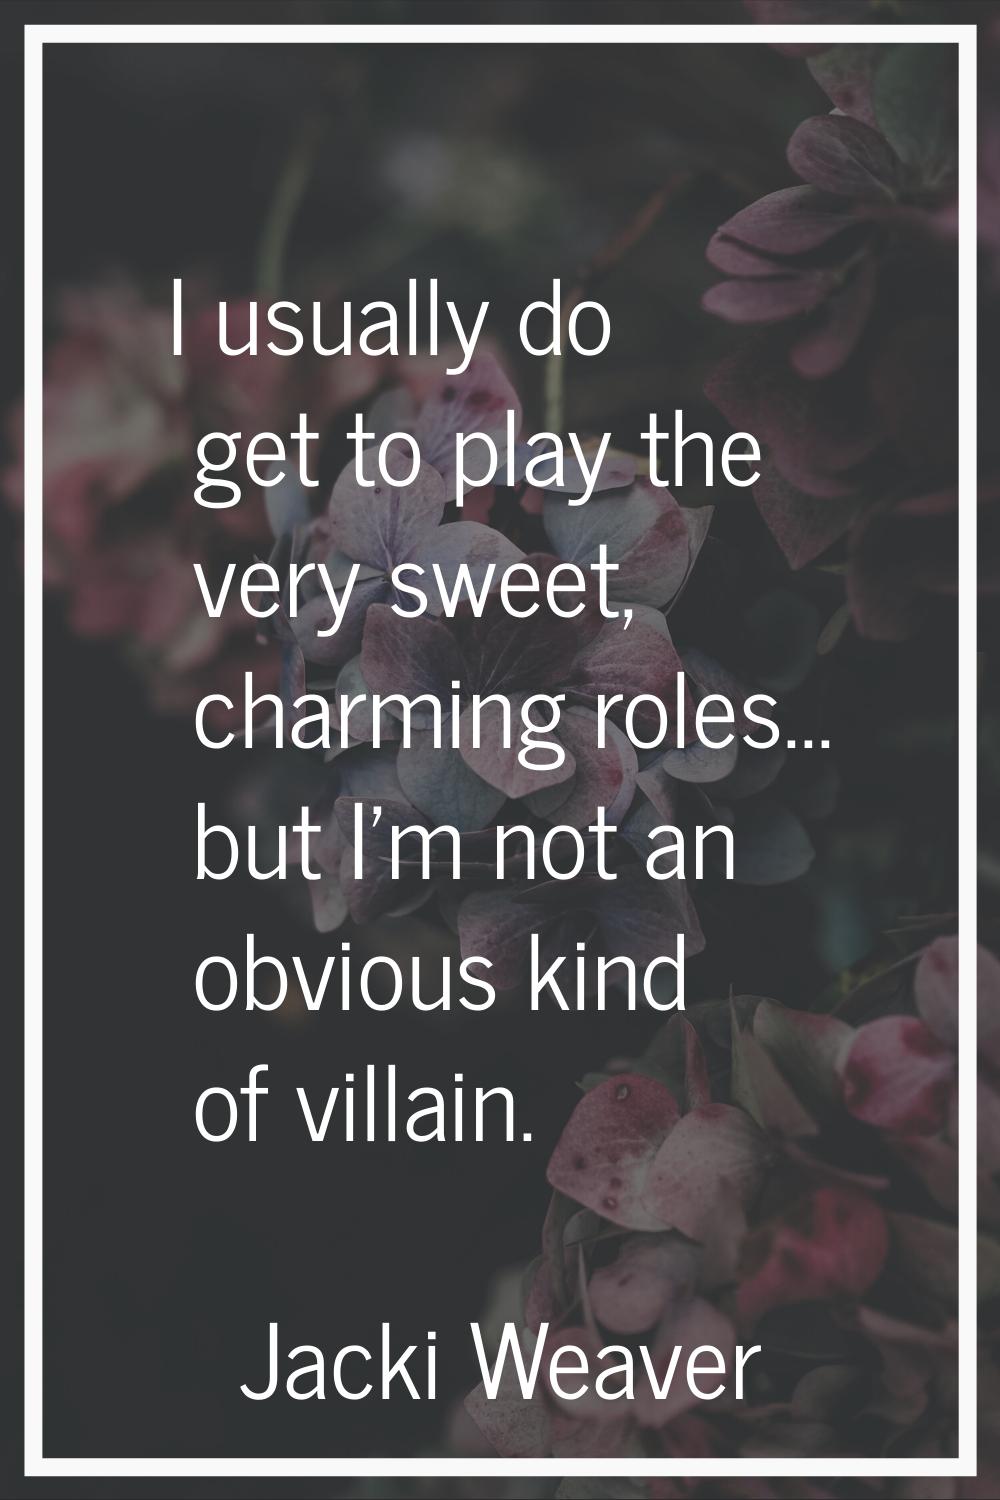 I usually do get to play the very sweet, charming roles... but I'm not an obvious kind of villain.